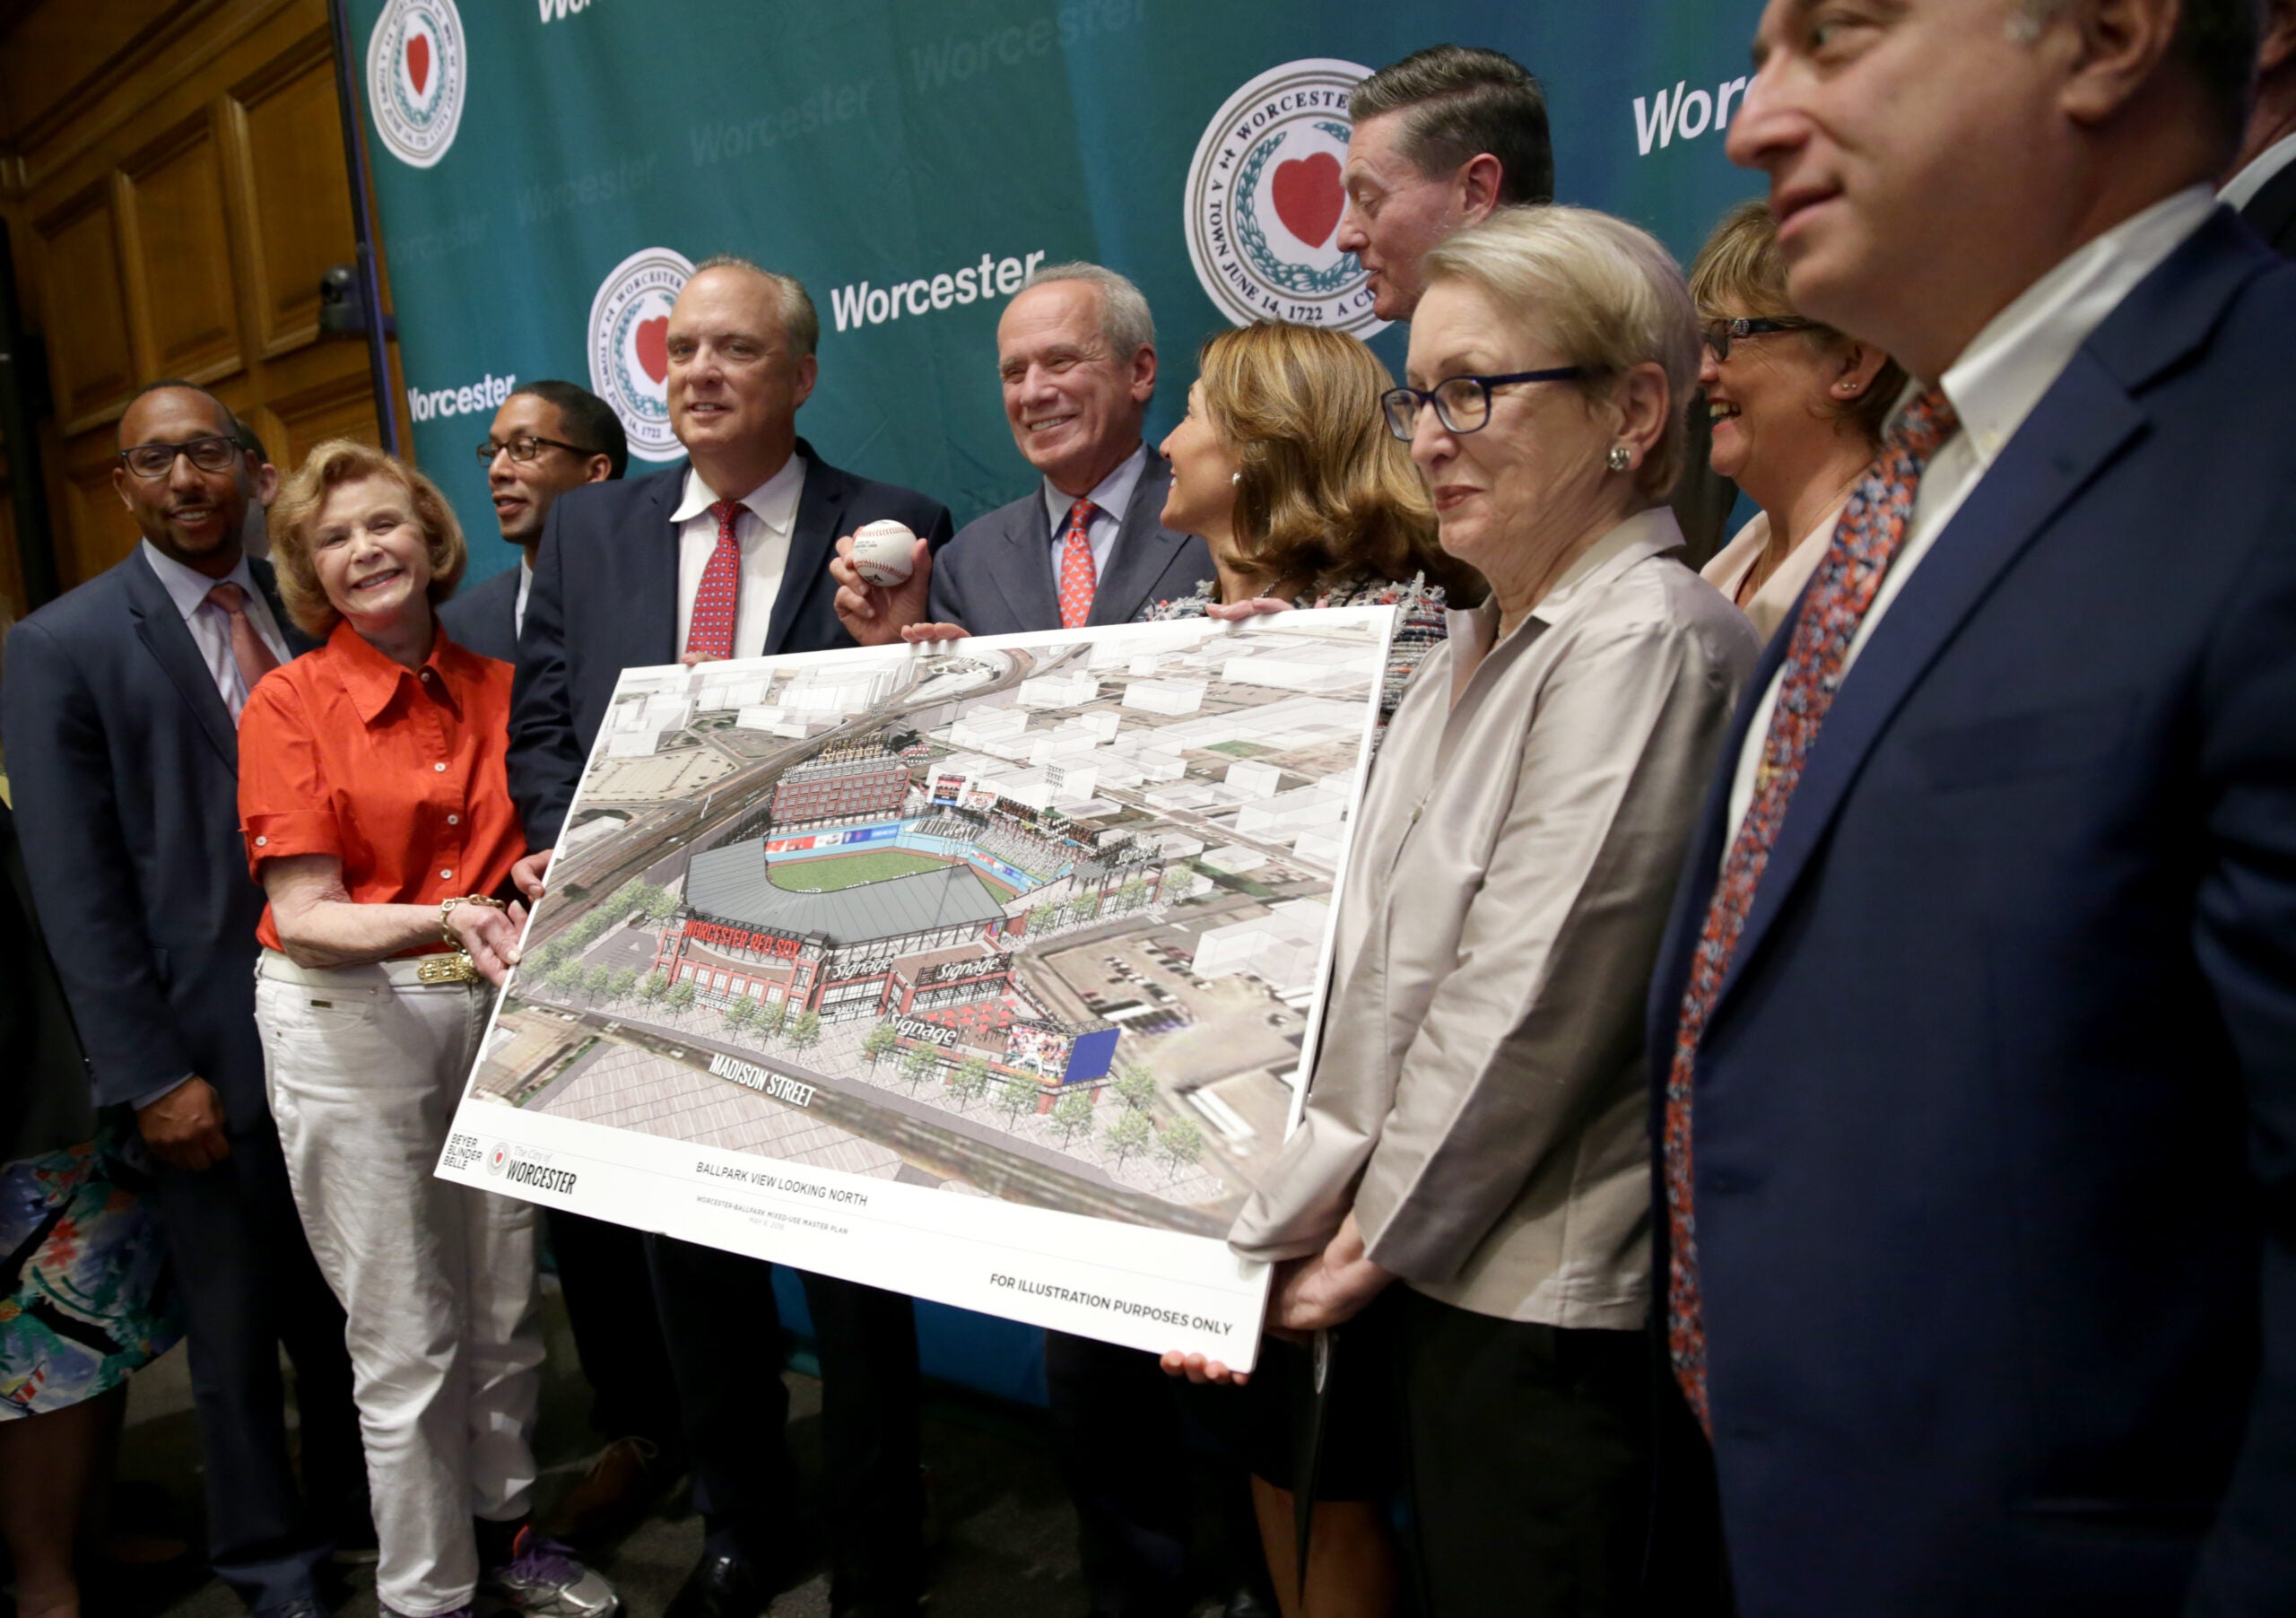 Pawtucket Red Sox Reach Tentative Deal To Move To Worcester